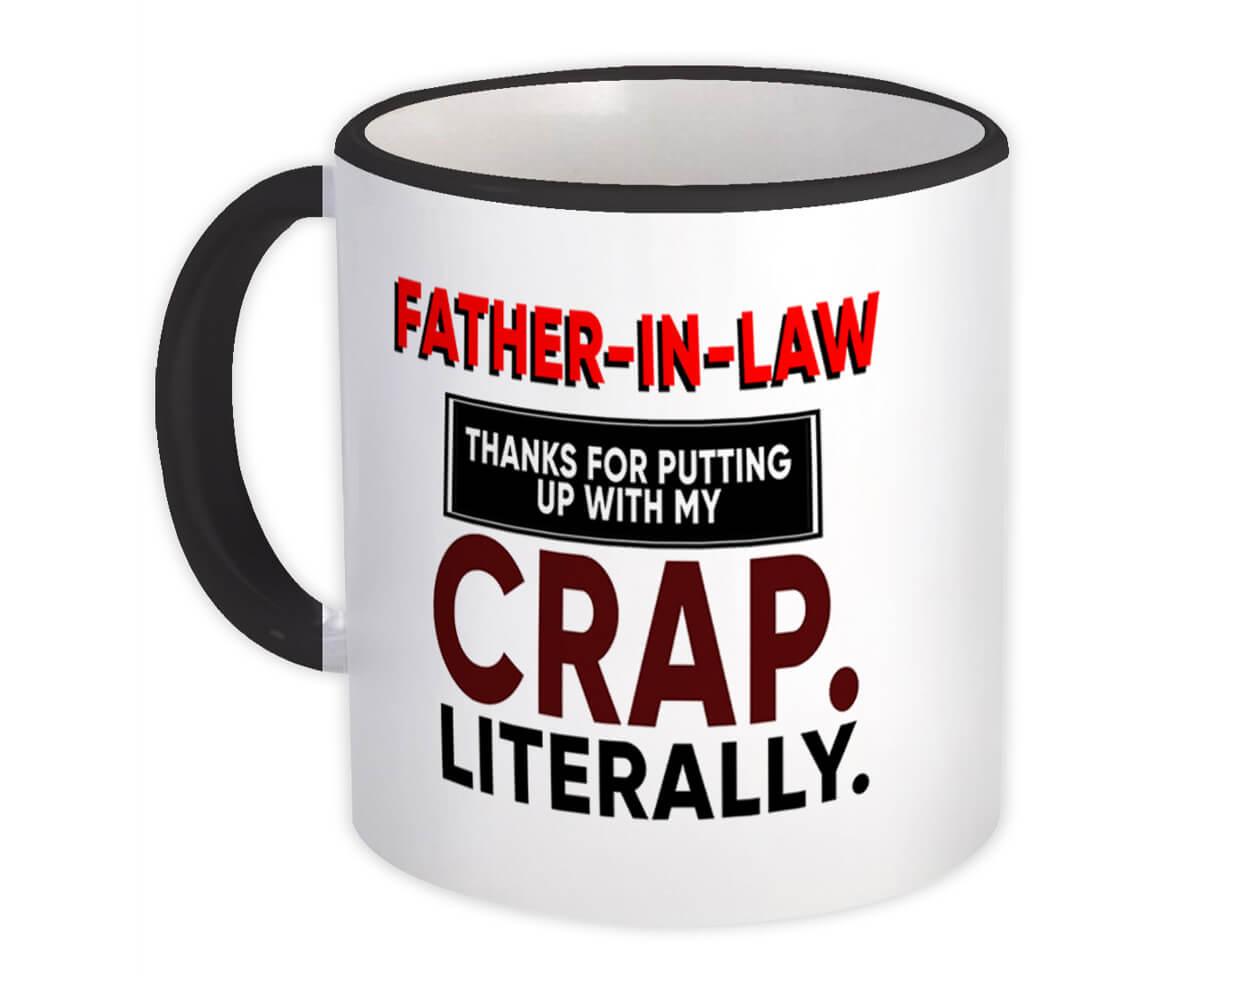 FATHER-IN-LAW Gift Mug Thanks Putting With My Crap Literally Dad Day Christmas 